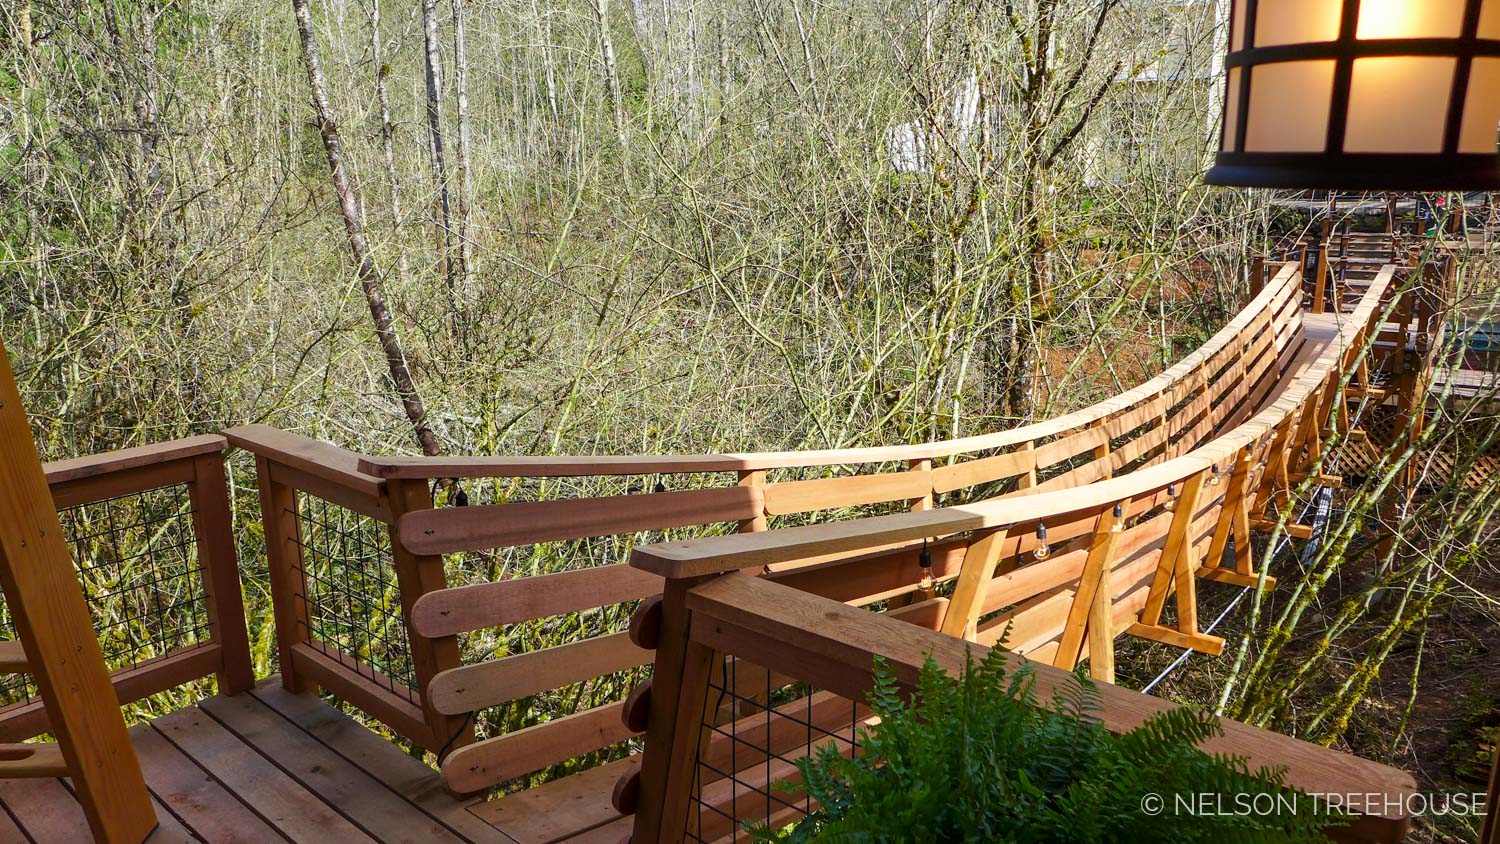  Thrill 'n' Chill Treehouse Suspension Bridge - Nelson Treehouse 